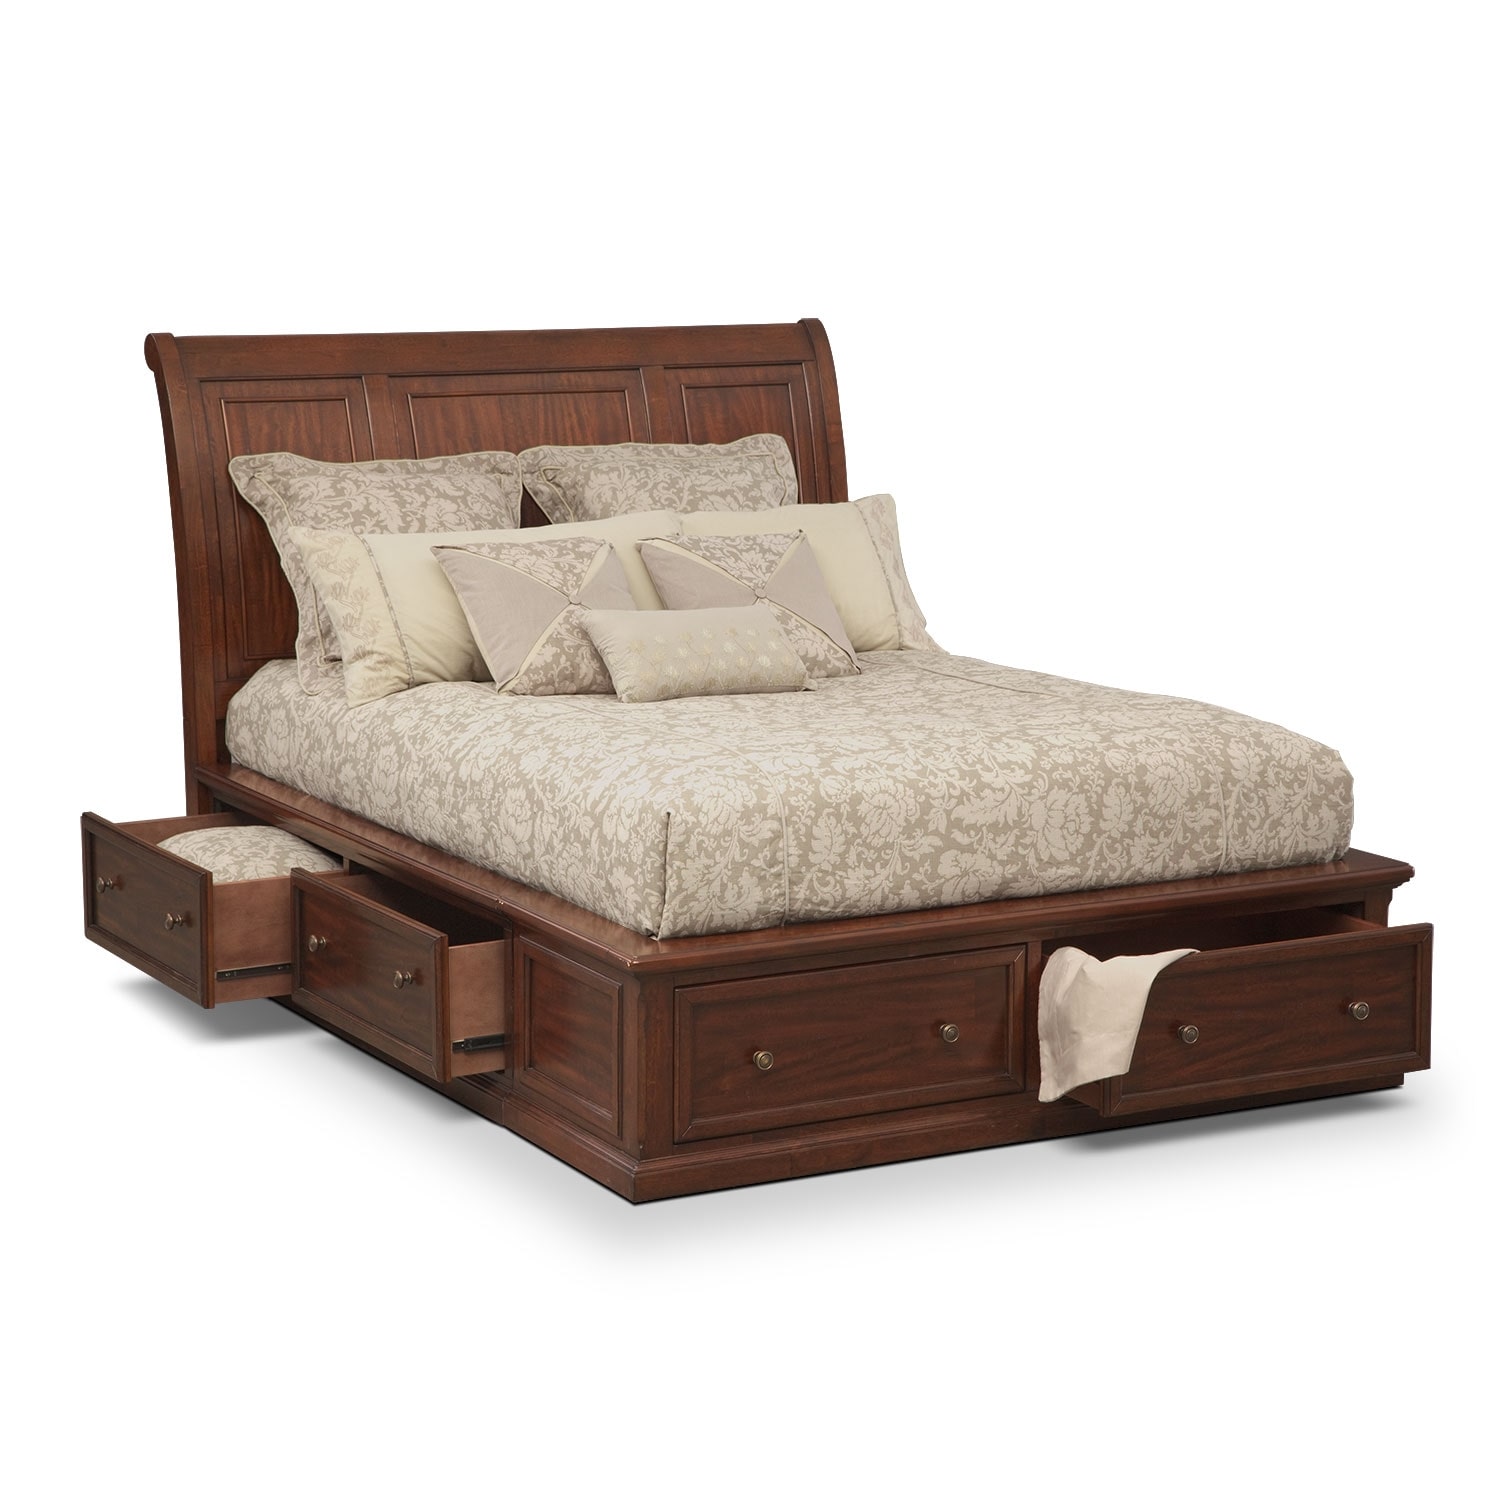 Hanover King Storage Bed by American Signature